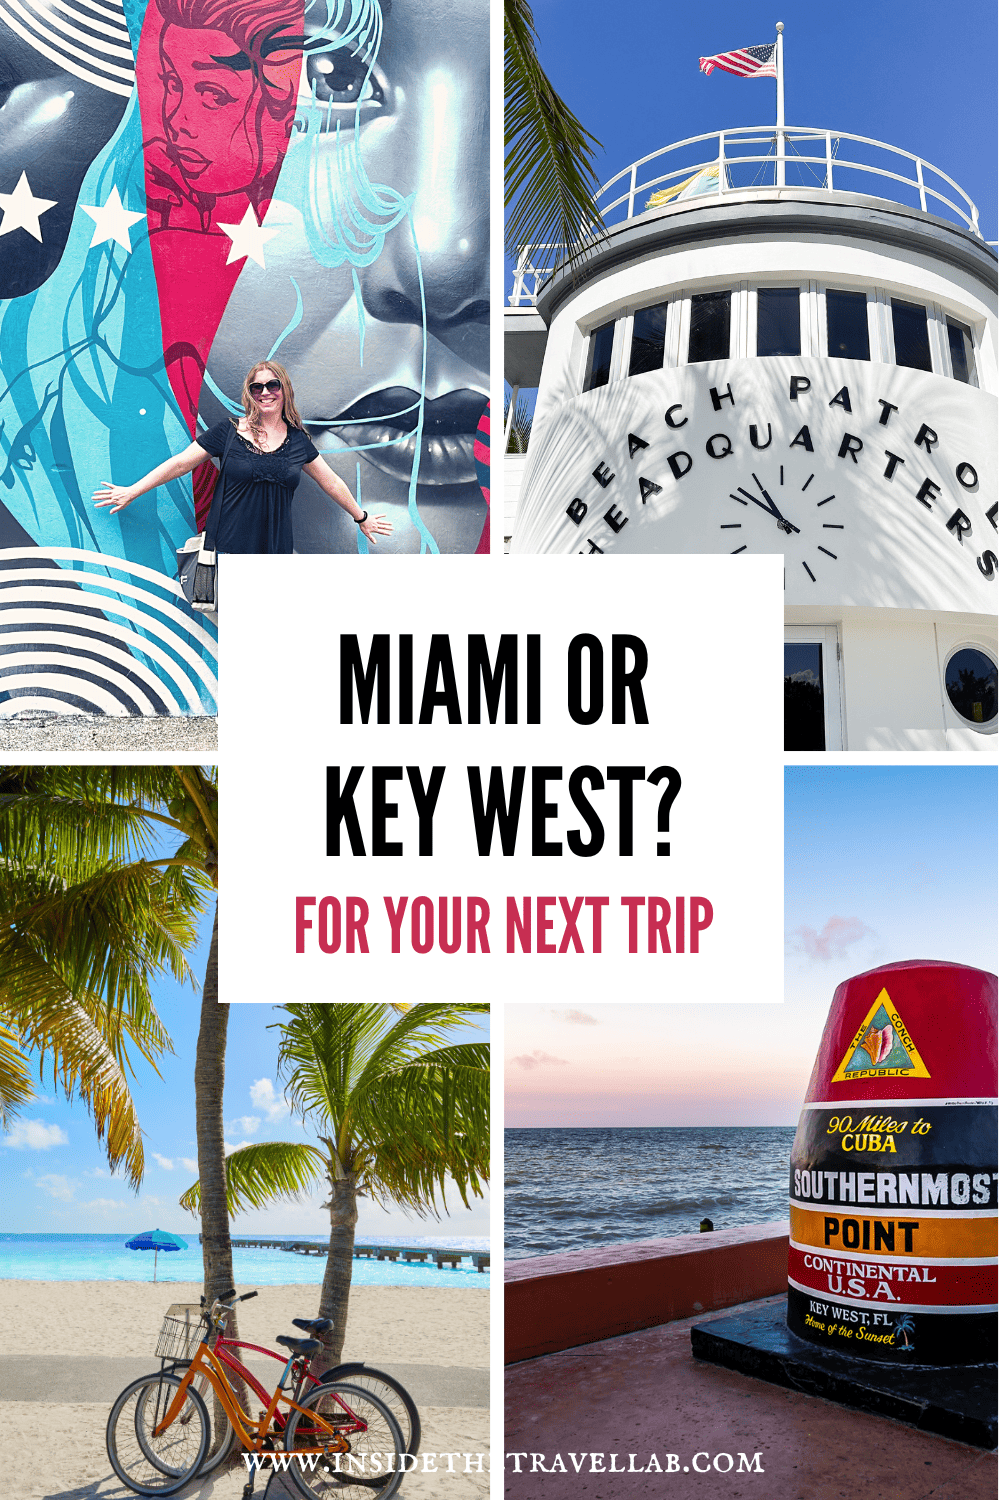 Miami or Key West cover image with photos from both destinations